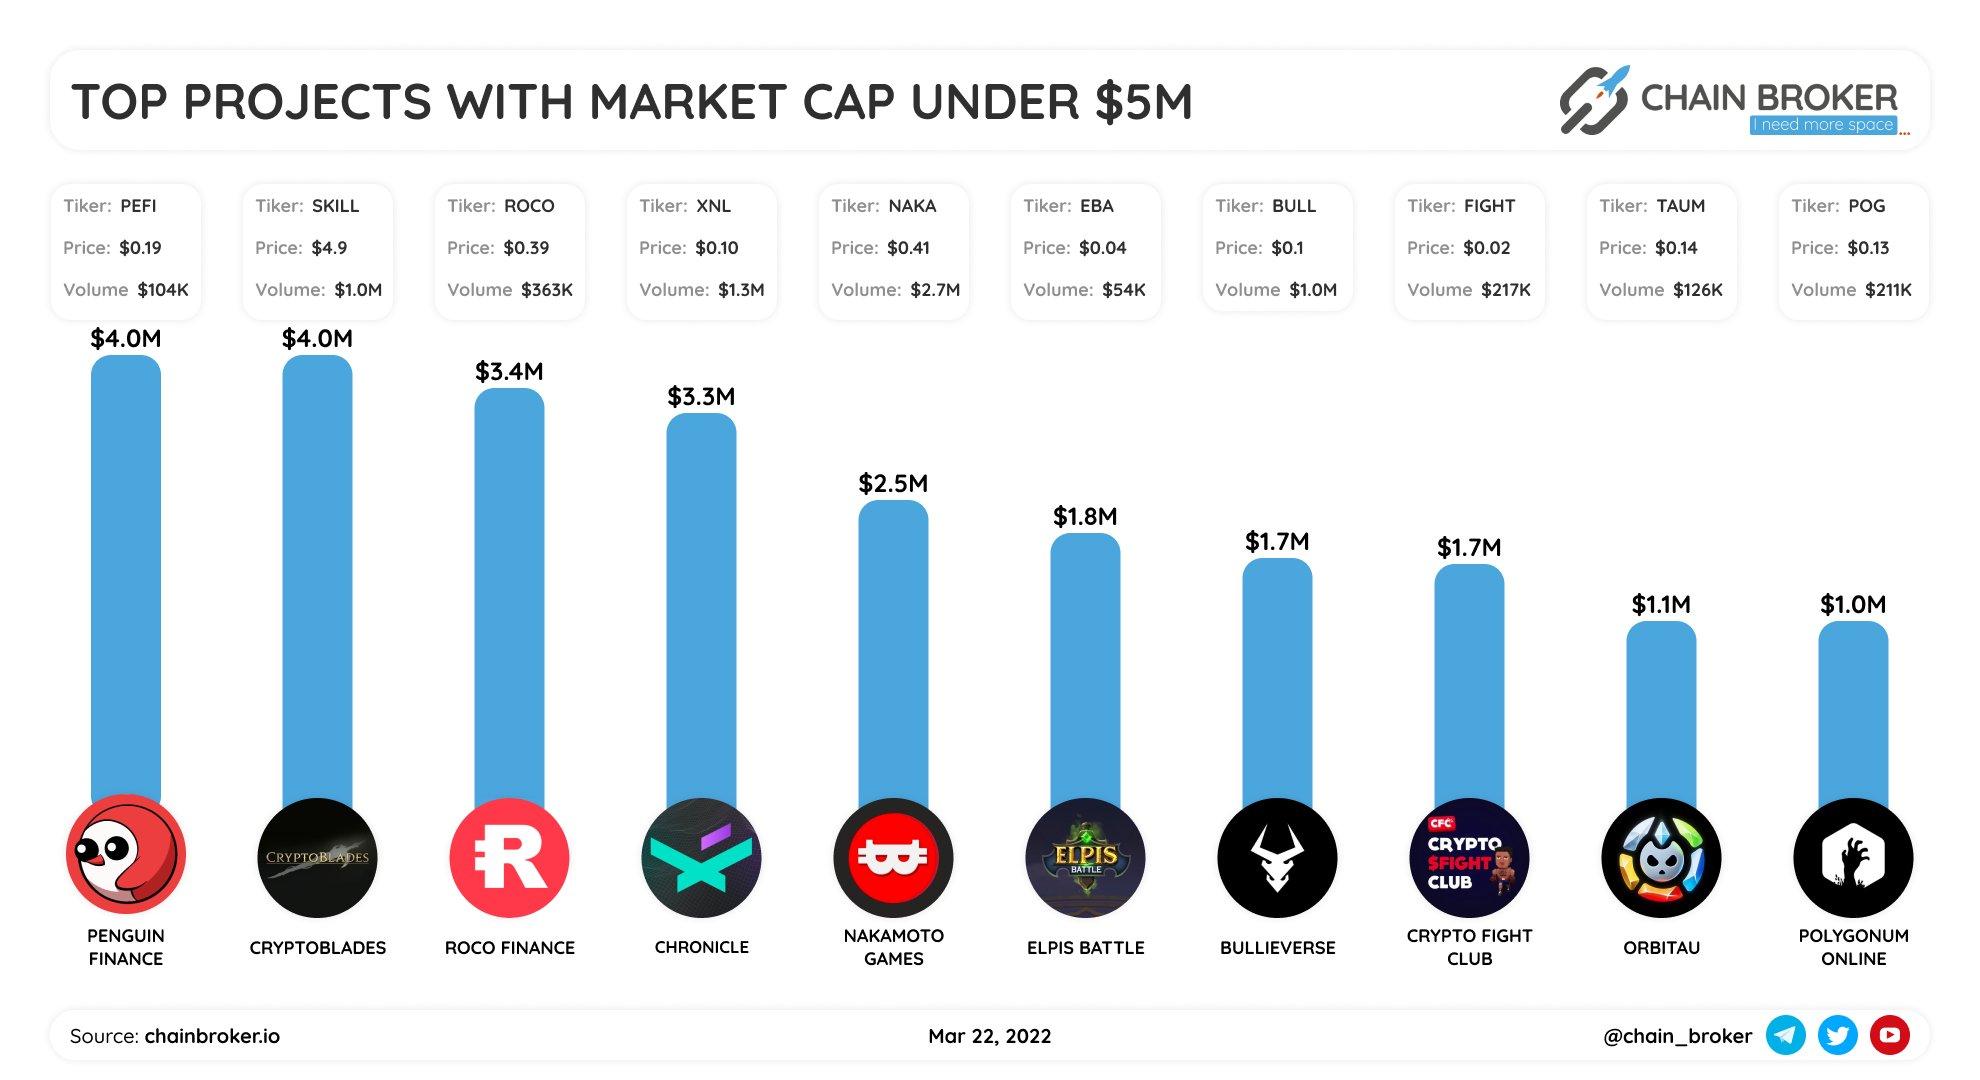 Top projects with market cap $5M-$10M